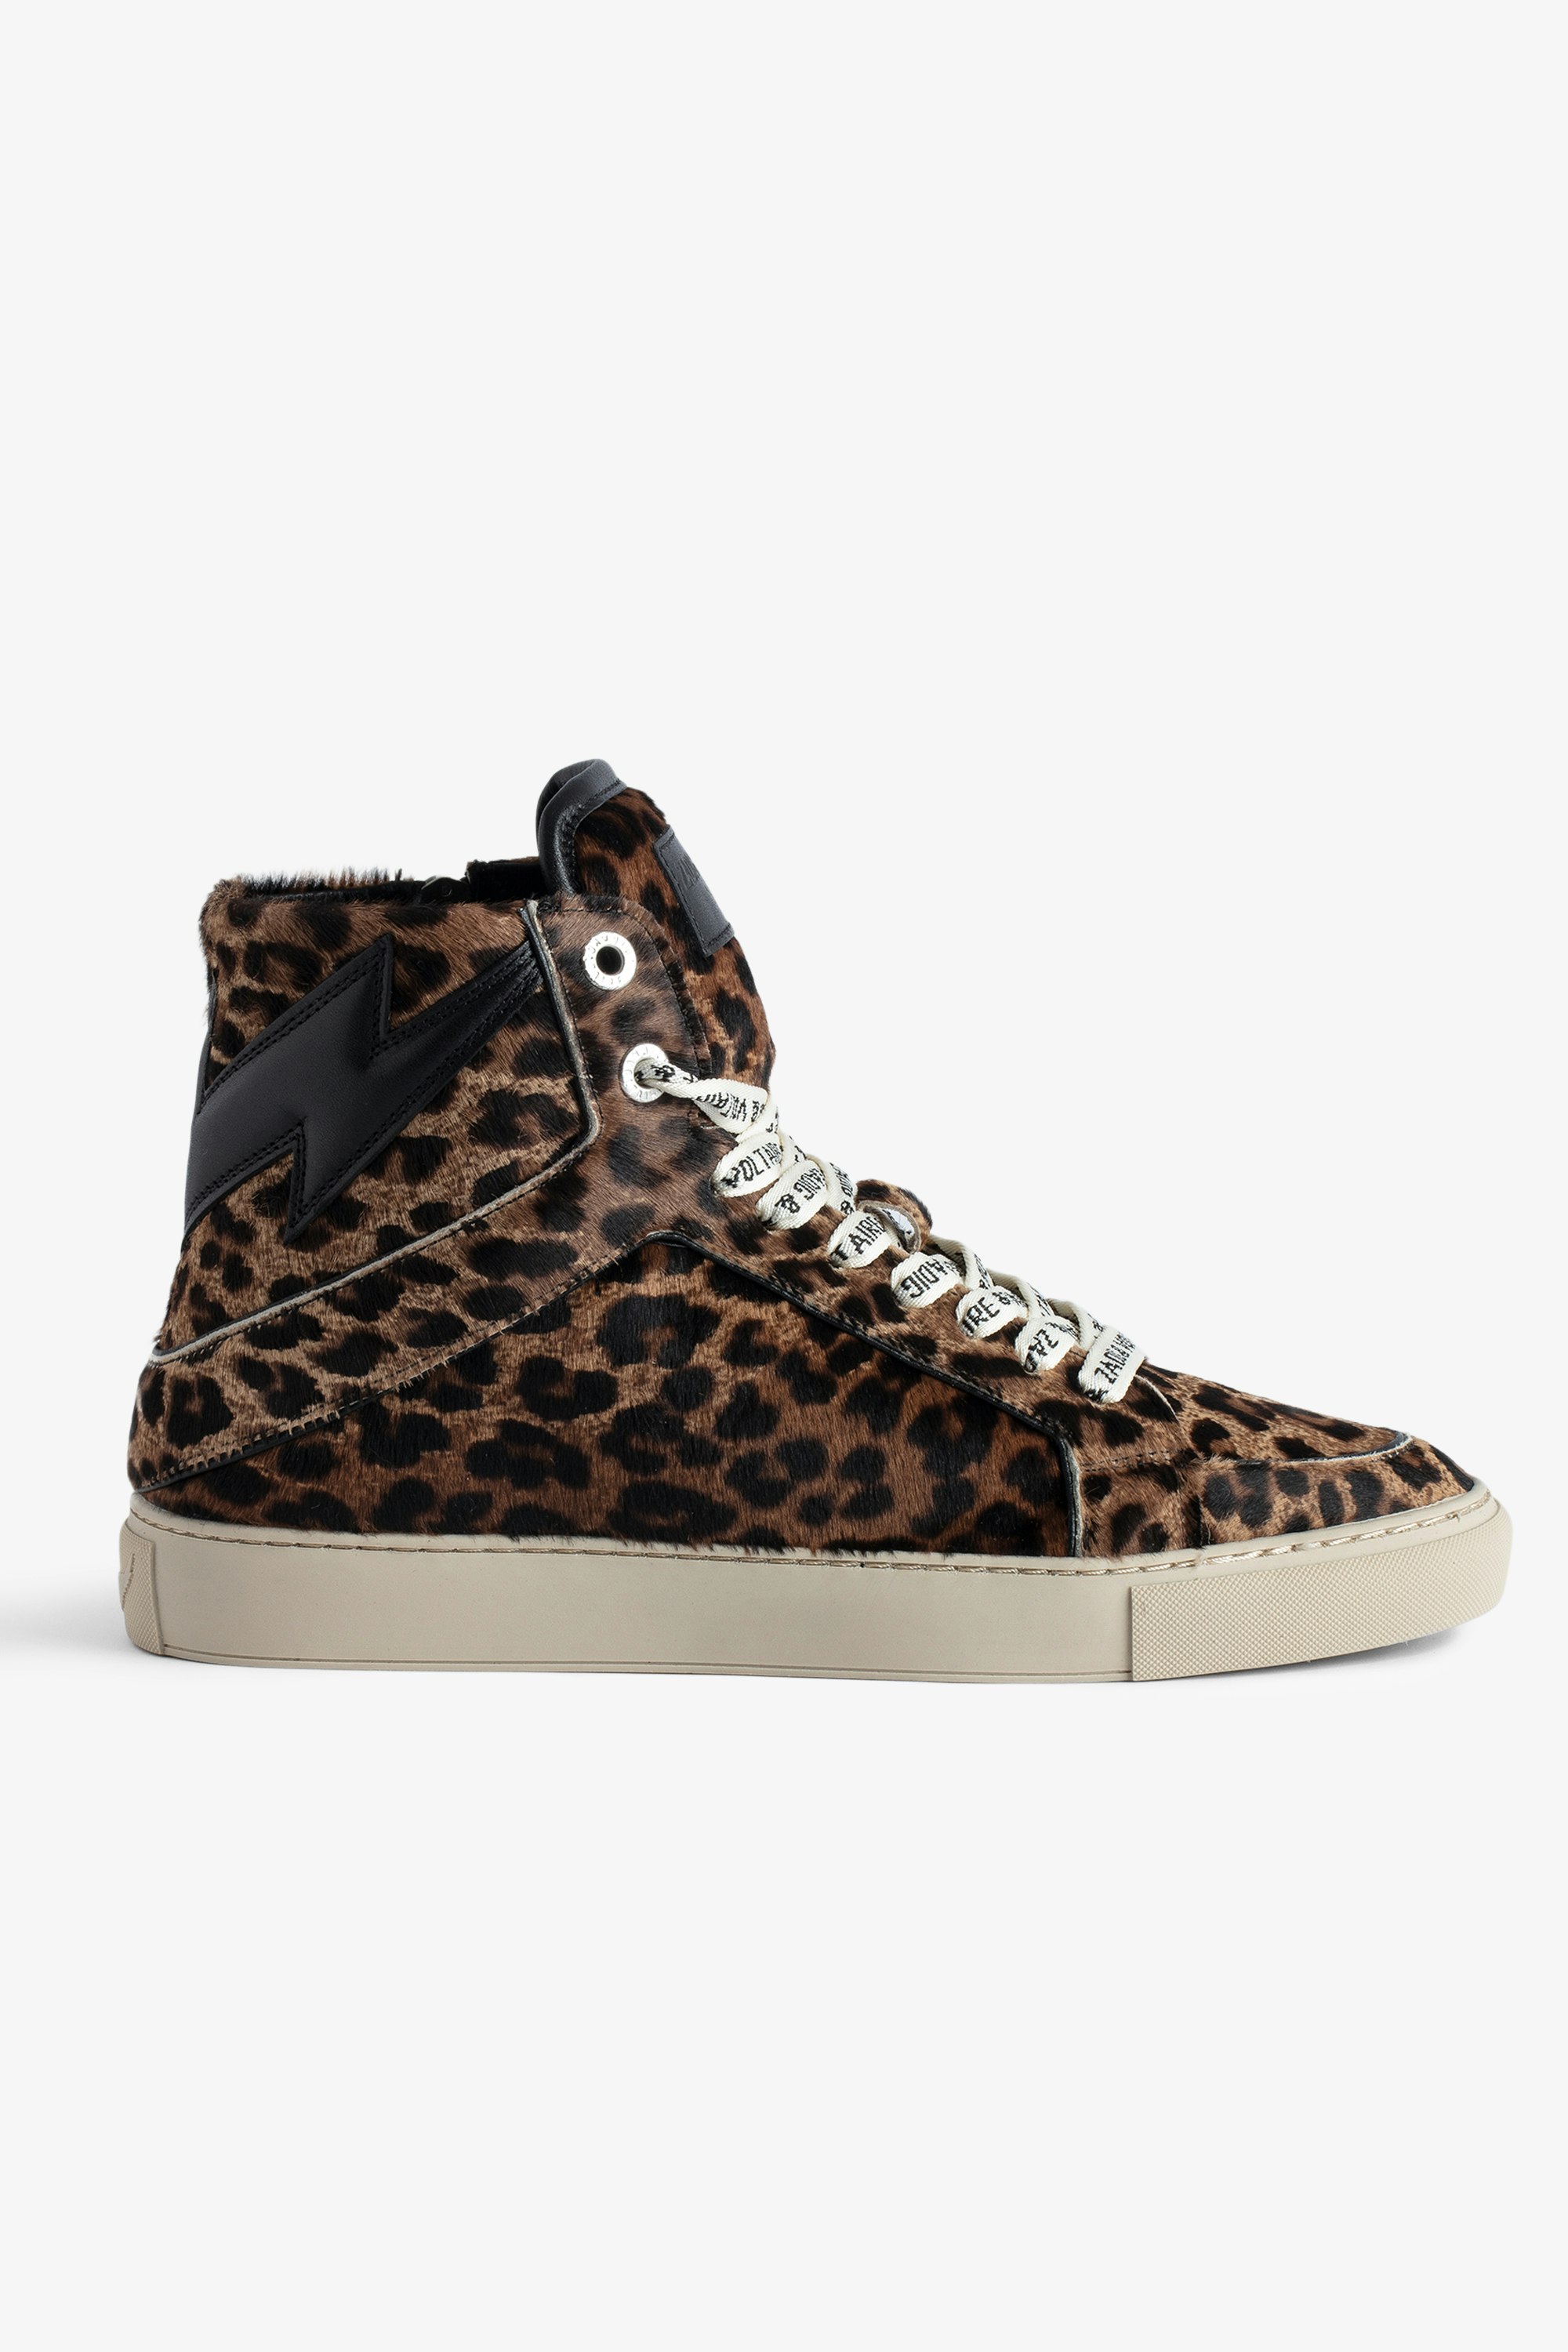 ZV1747 High Flash High-Top Sneakers - Women’s leopard-effect brown leather high-top sneakers with lightning bolt panels.